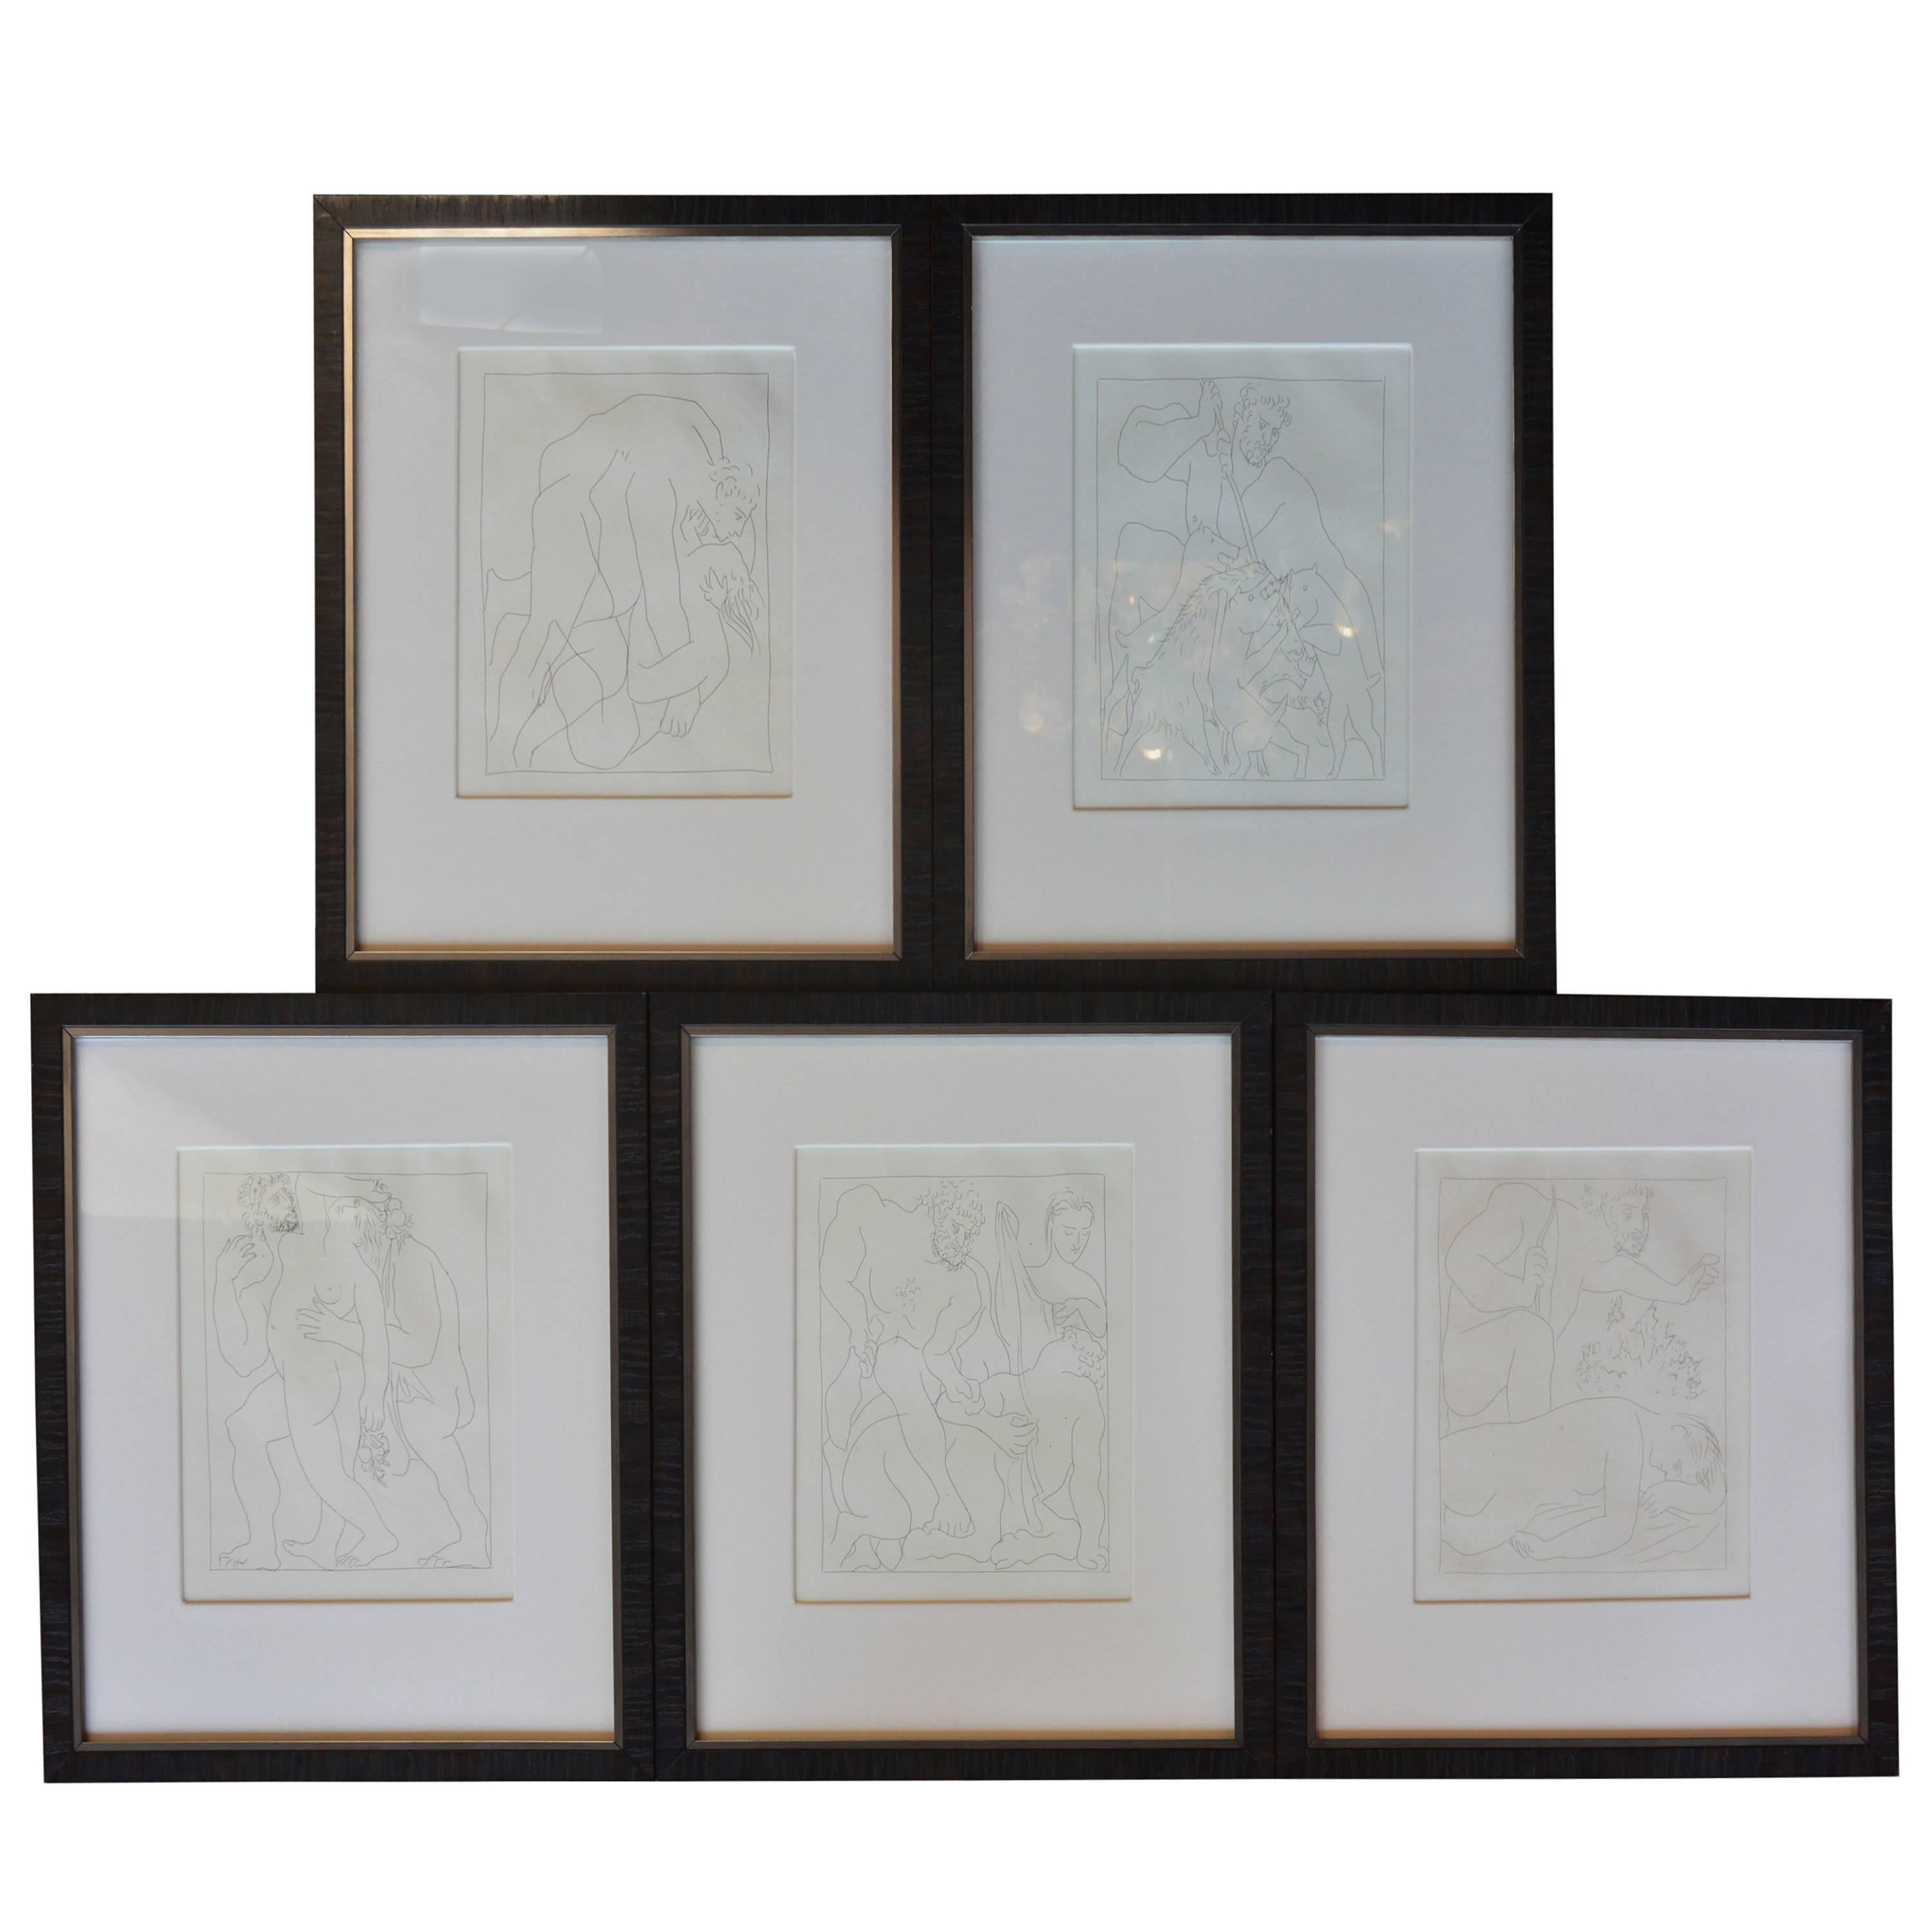 Set of Five Pablo Picasso Etchings